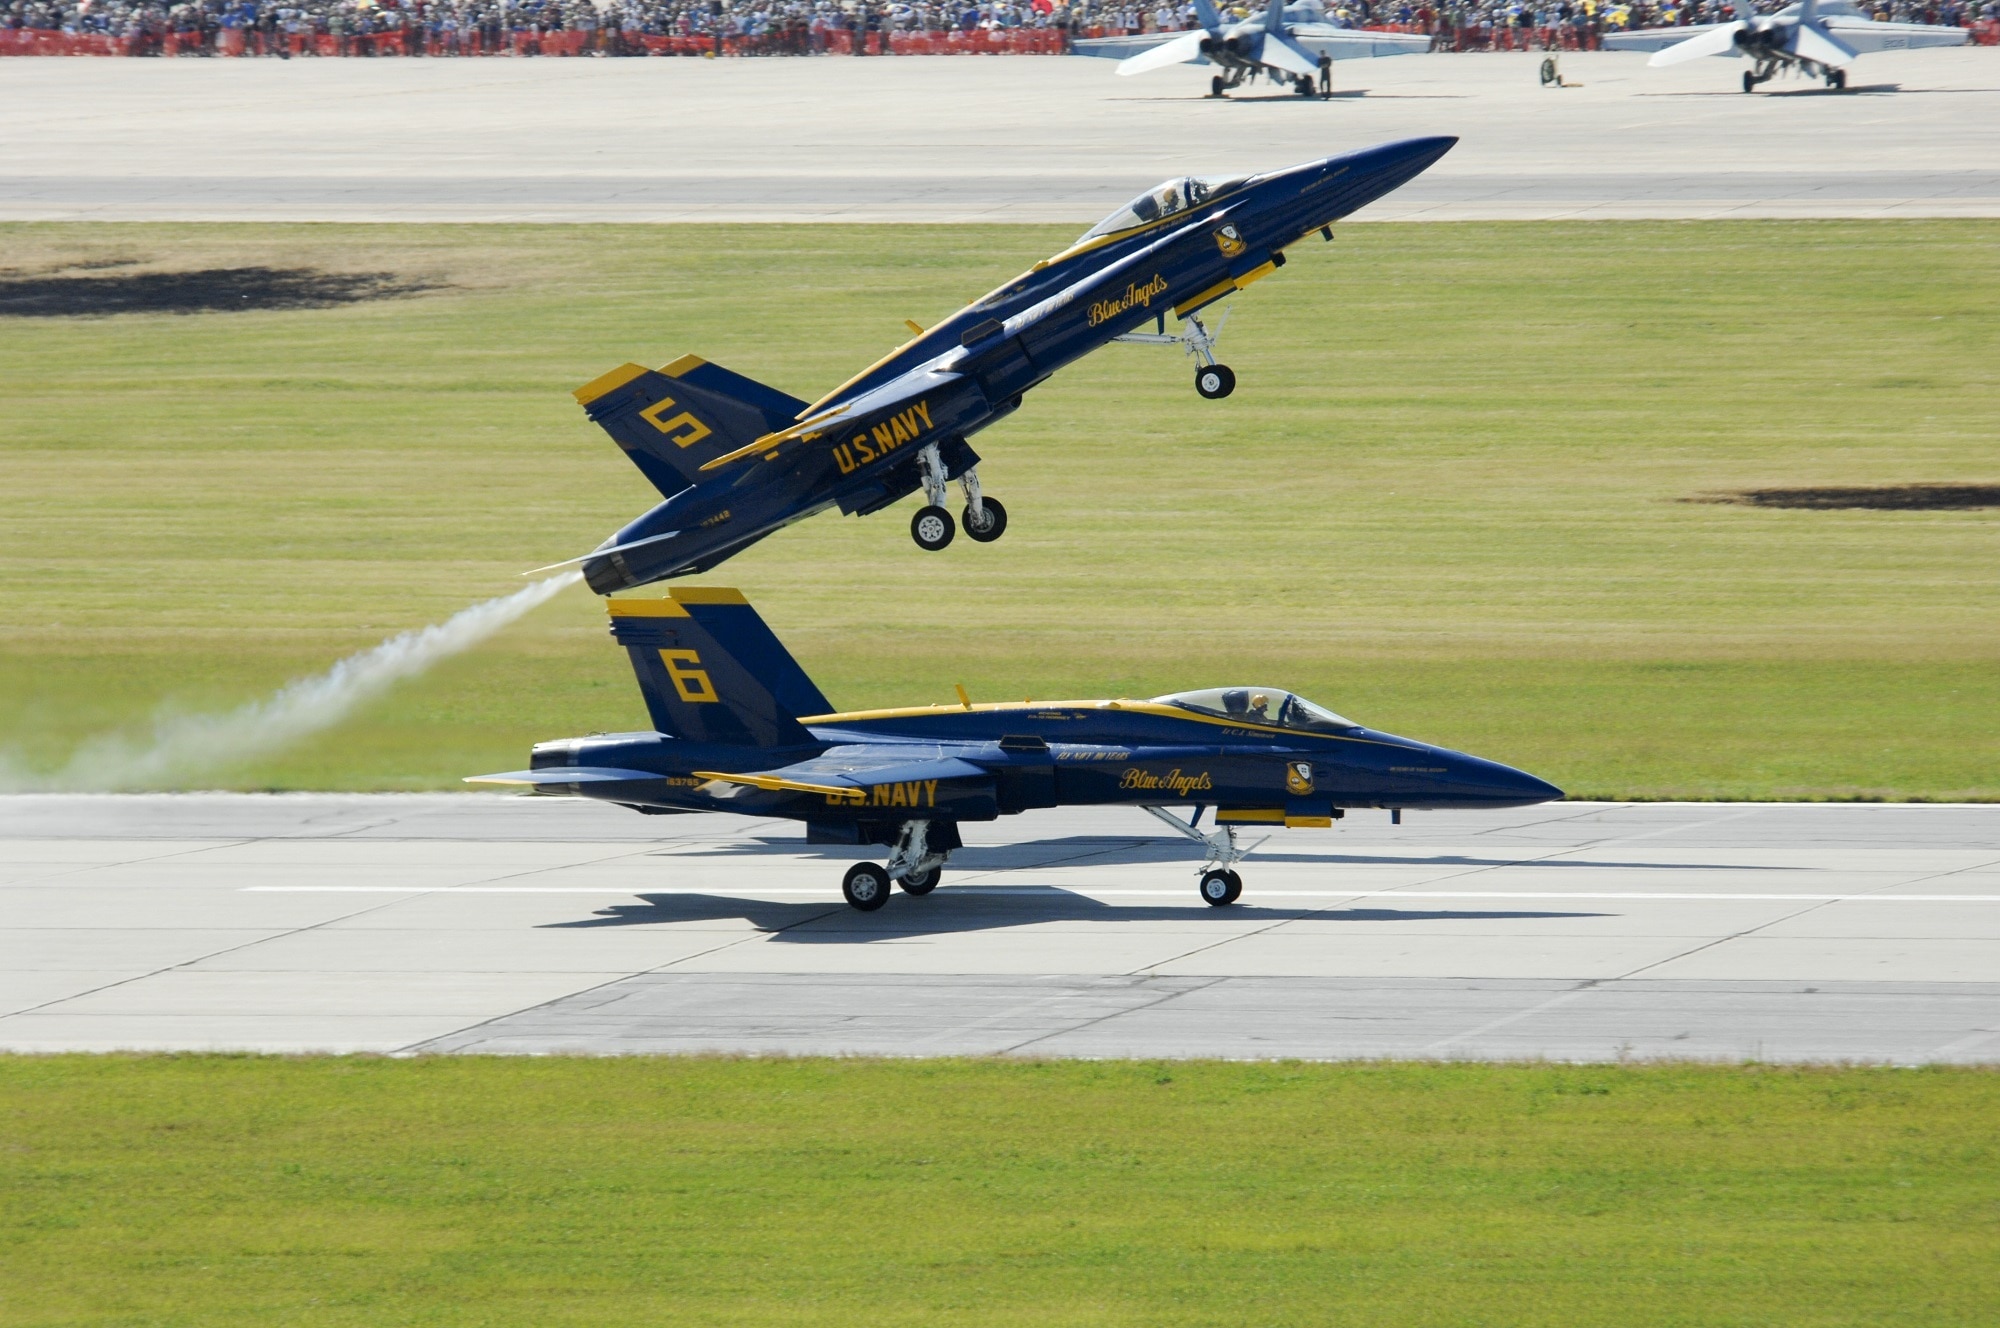 Precision, Blue Angels, Navy, Planes, airplane, air vehicle